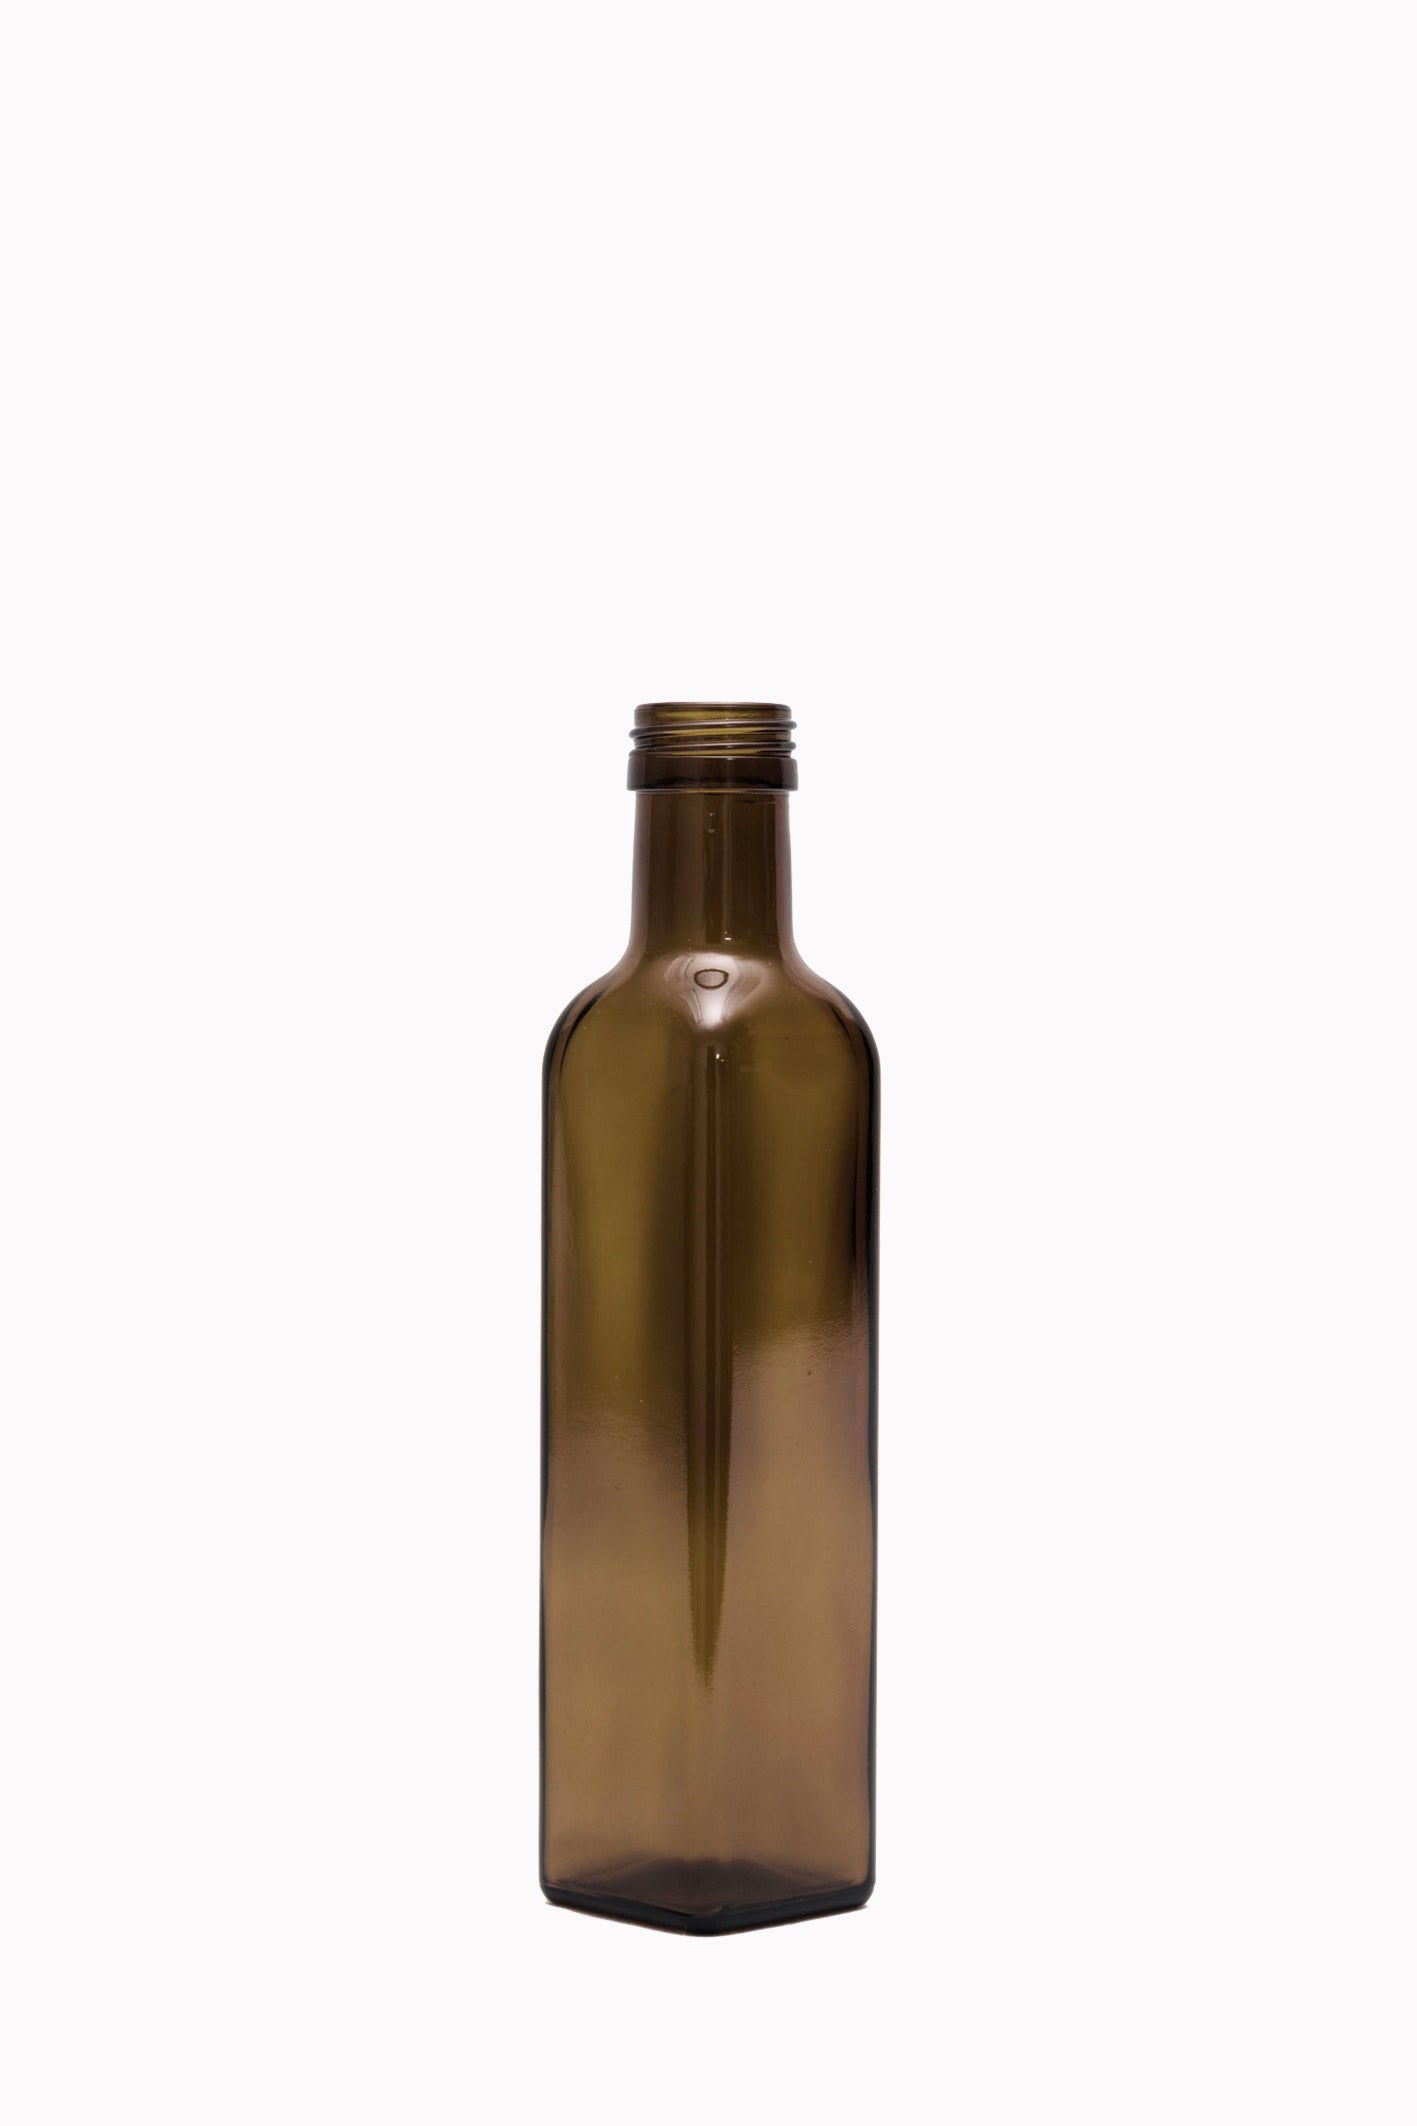 This is 250ml Marasca, one of the most recognizable bottles in the Olive Oil industry. 